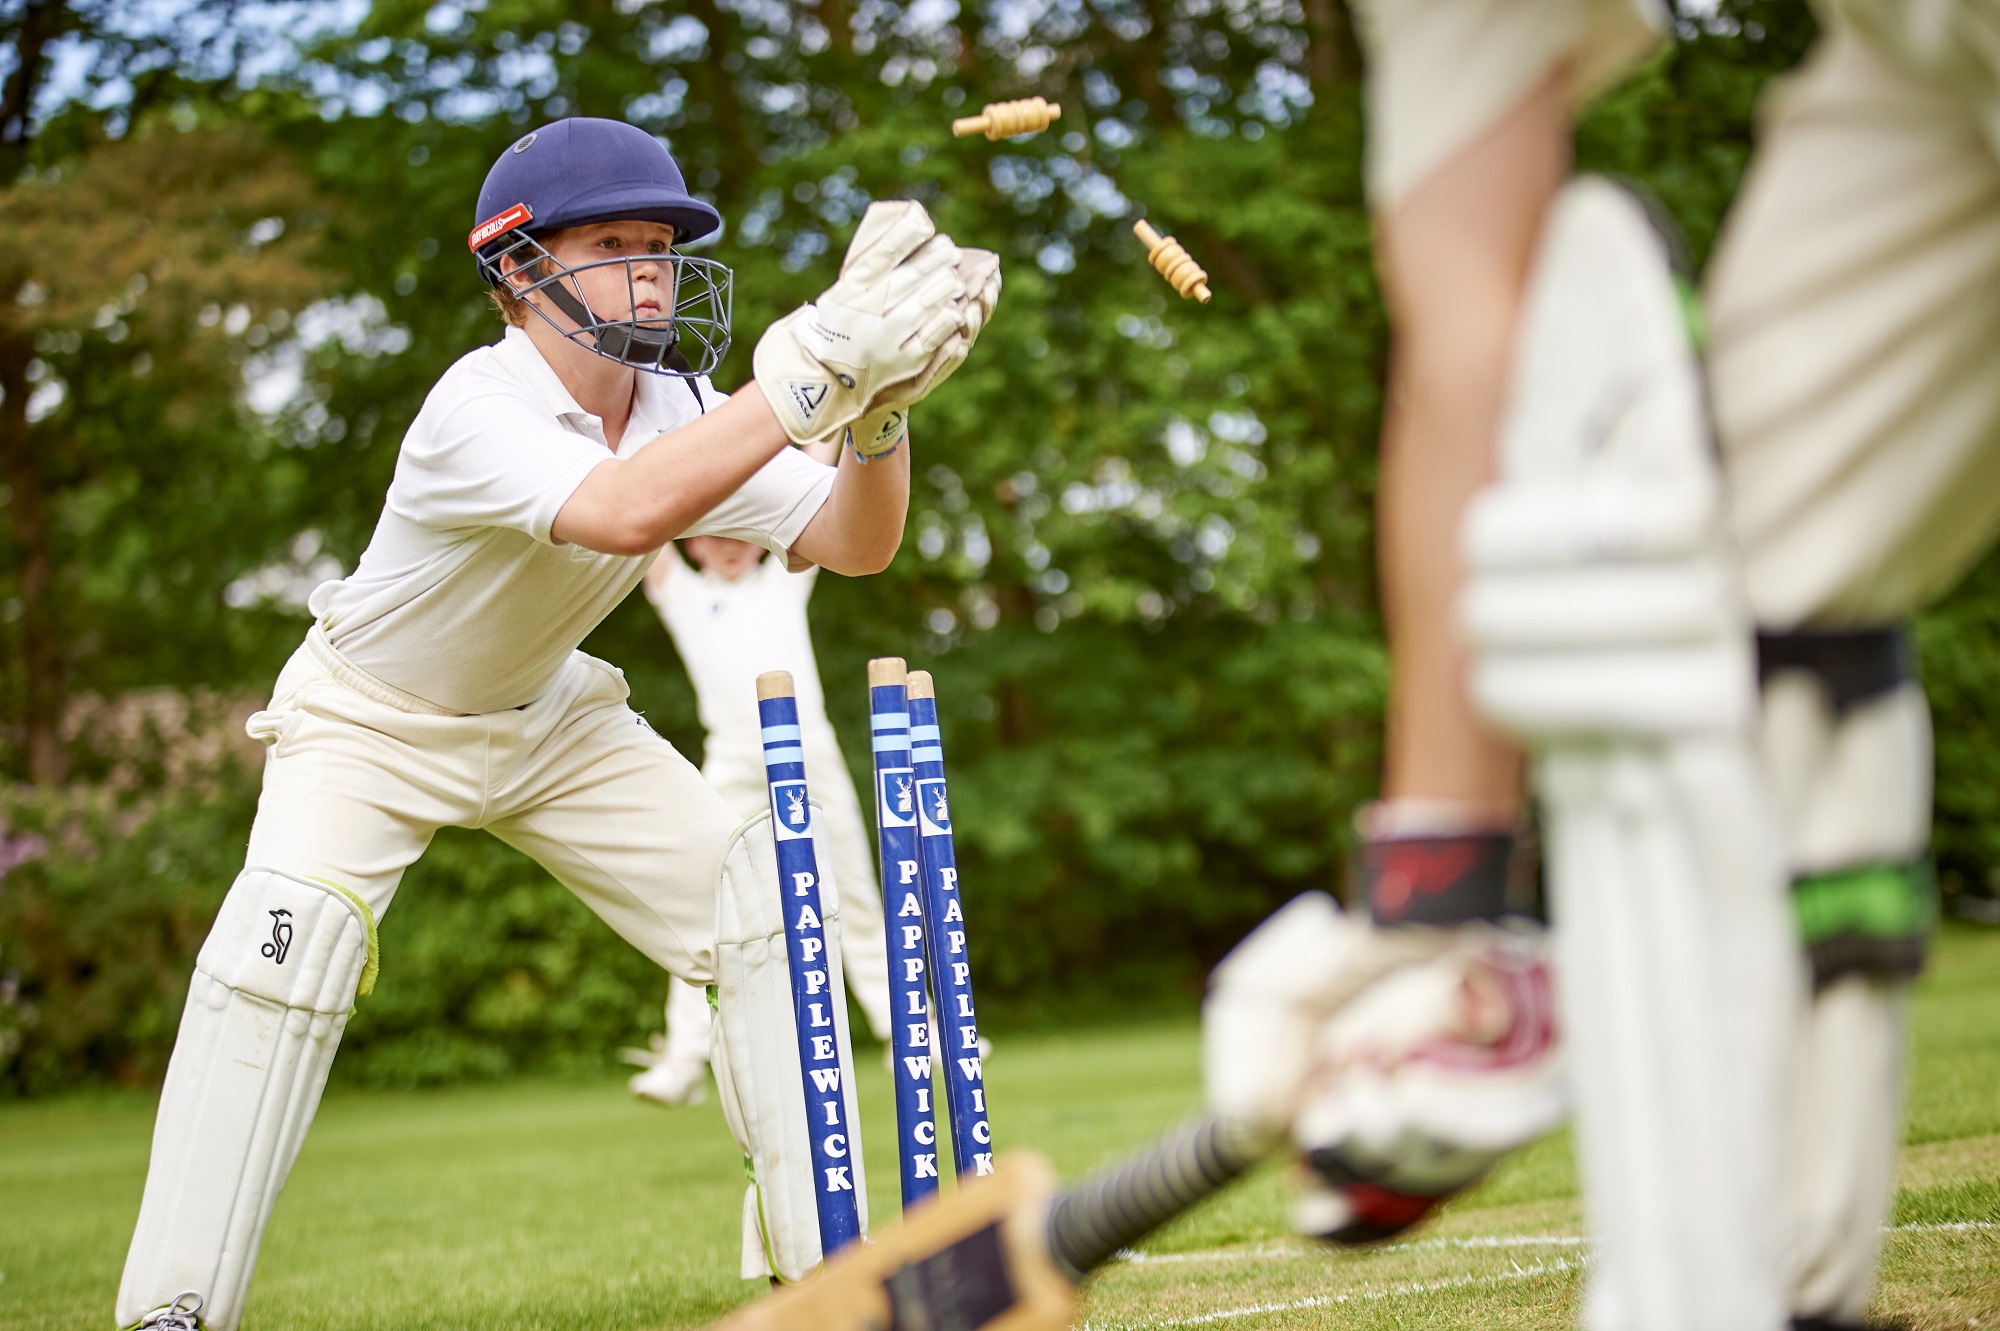 Young person playing cricket.